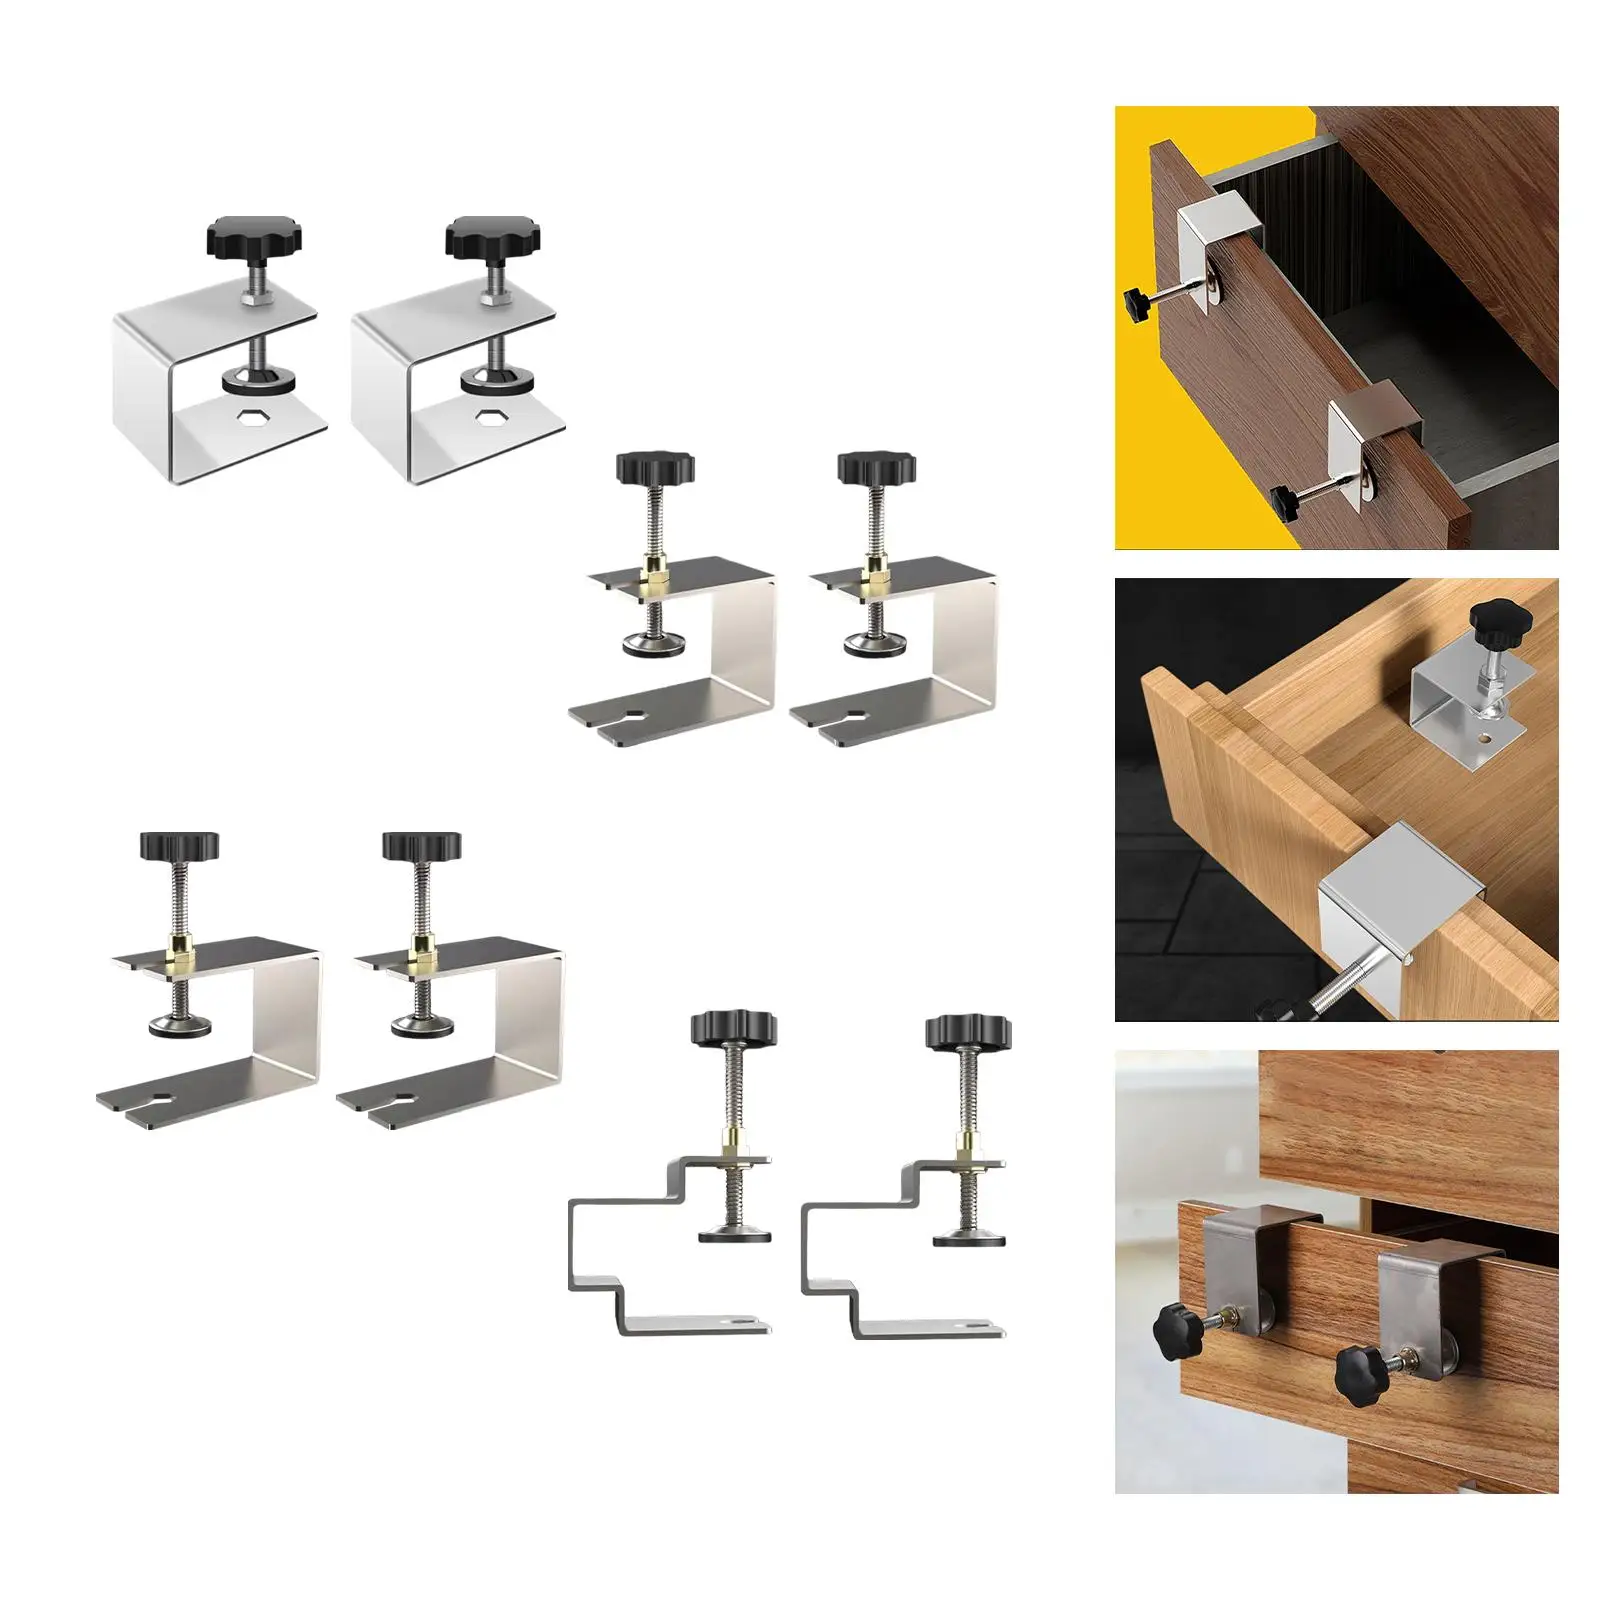 2x Stainless Steel Woodworking Clamp Drawer Front Installation Clamps Fixing Clip Fasten Stable Adjustment Hardware Smooth